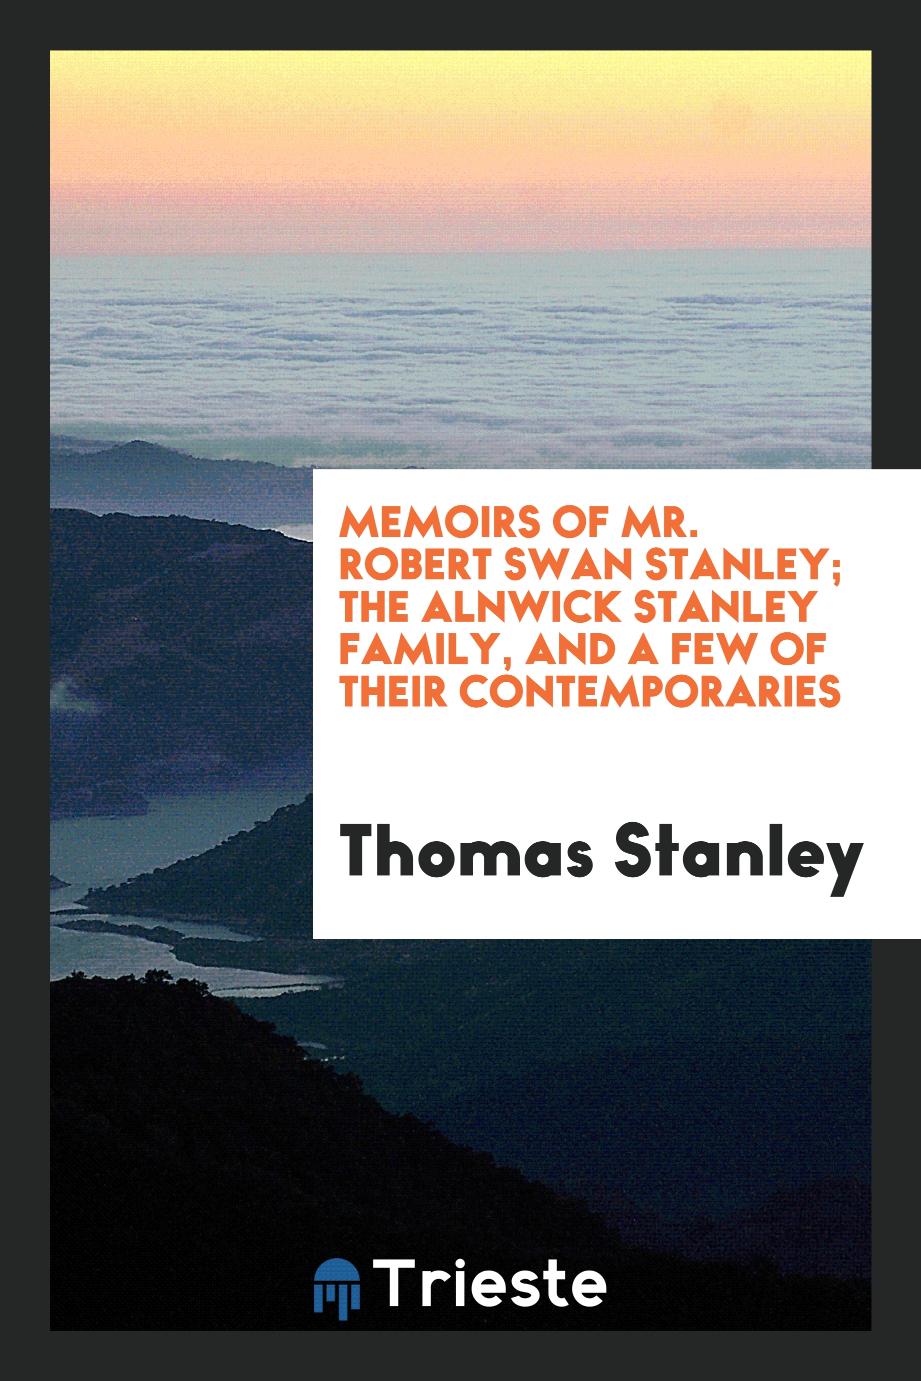 Memoirs of Mr. Robert Swan Stanley; the Alnwick Stanley family, and a few of their contemporaries